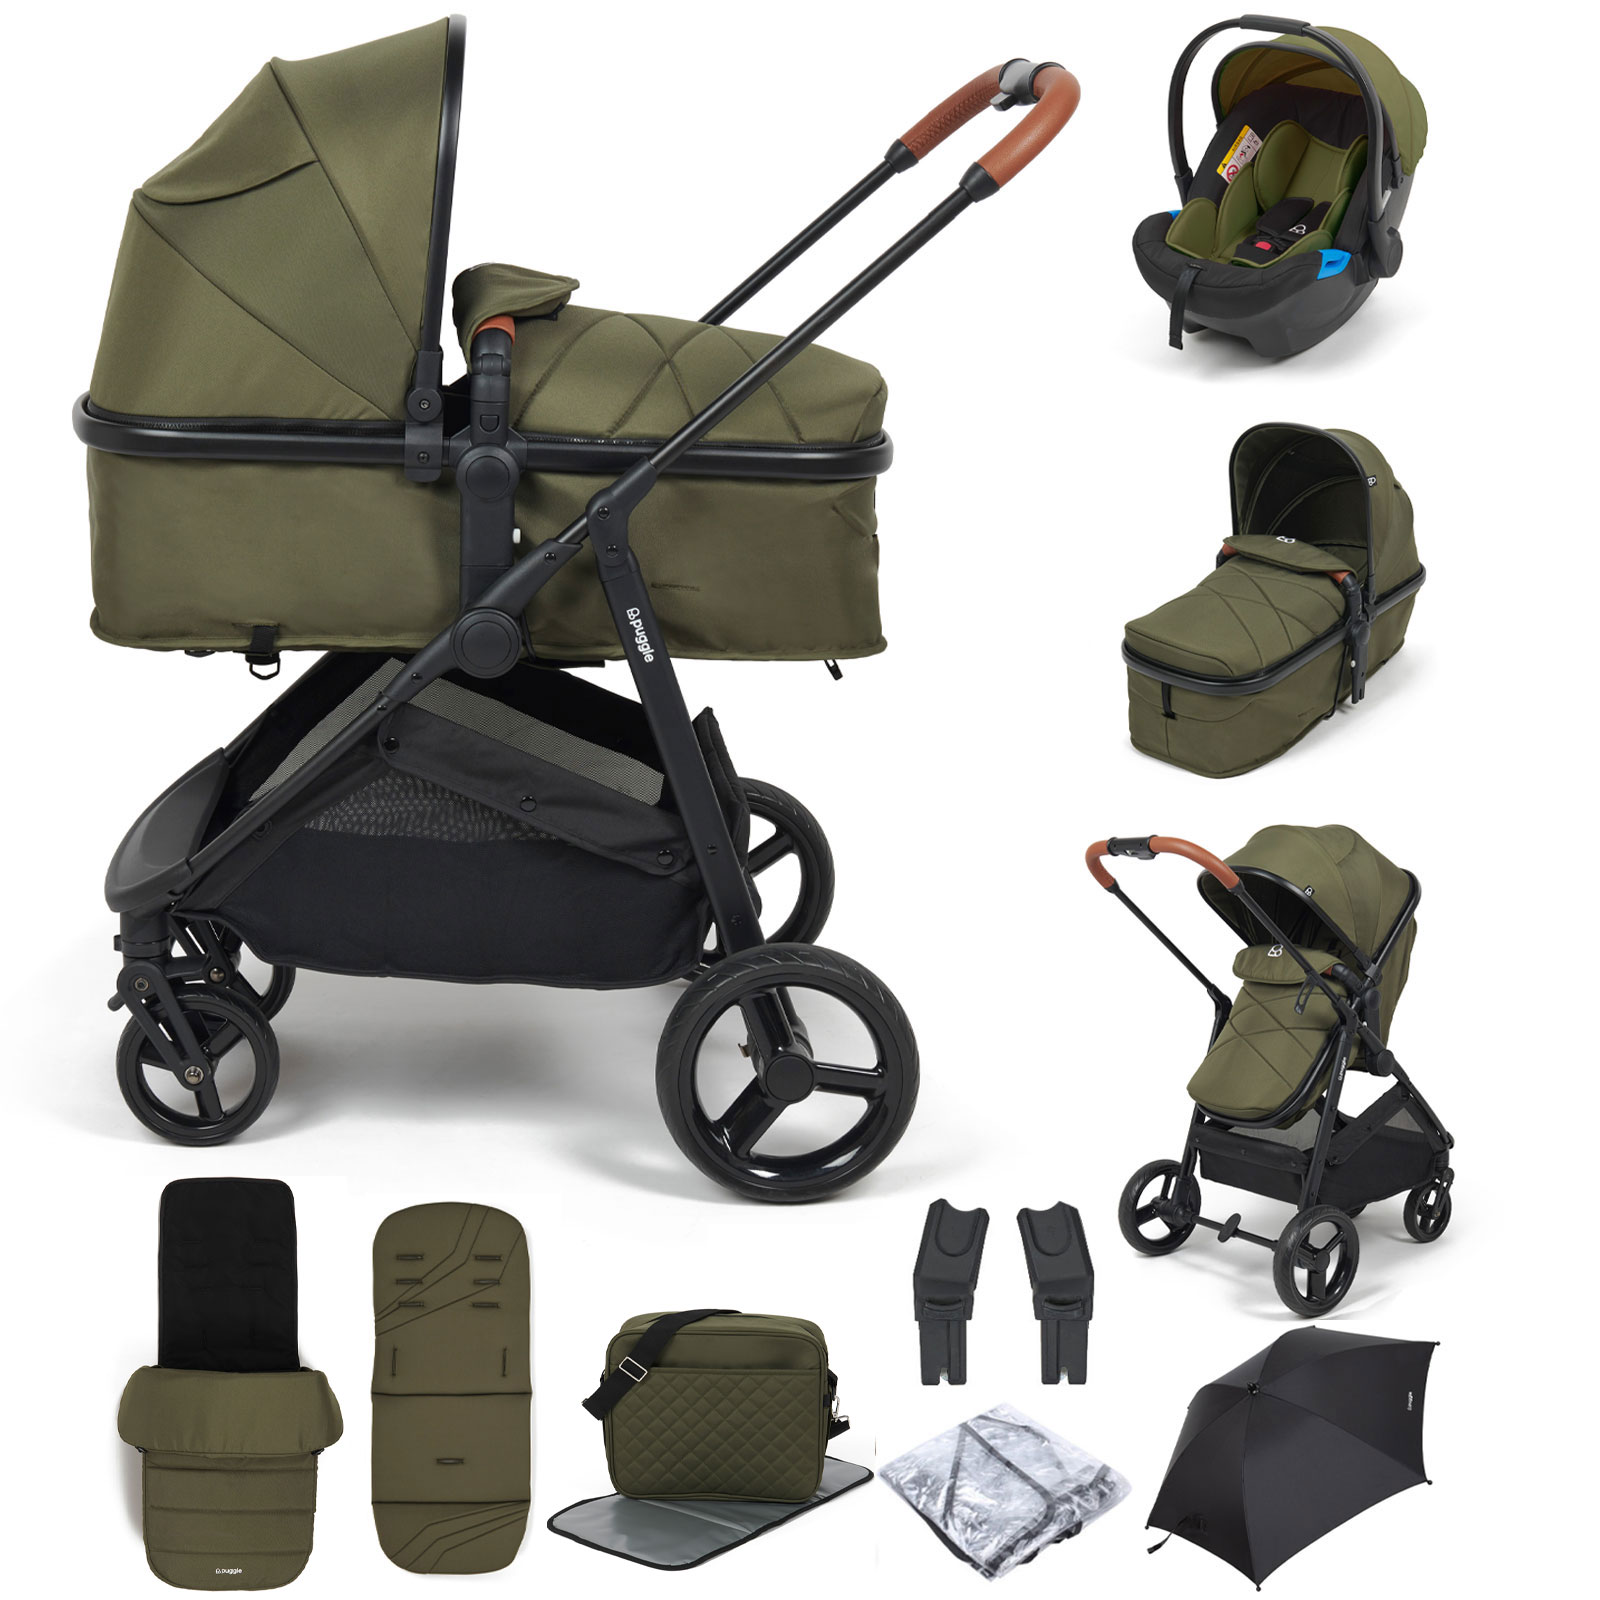 Puggle Monaco XT 2in1 Pram Pushchair Travel System with Footmuff, Changing Bag & Parasol - Forest Green